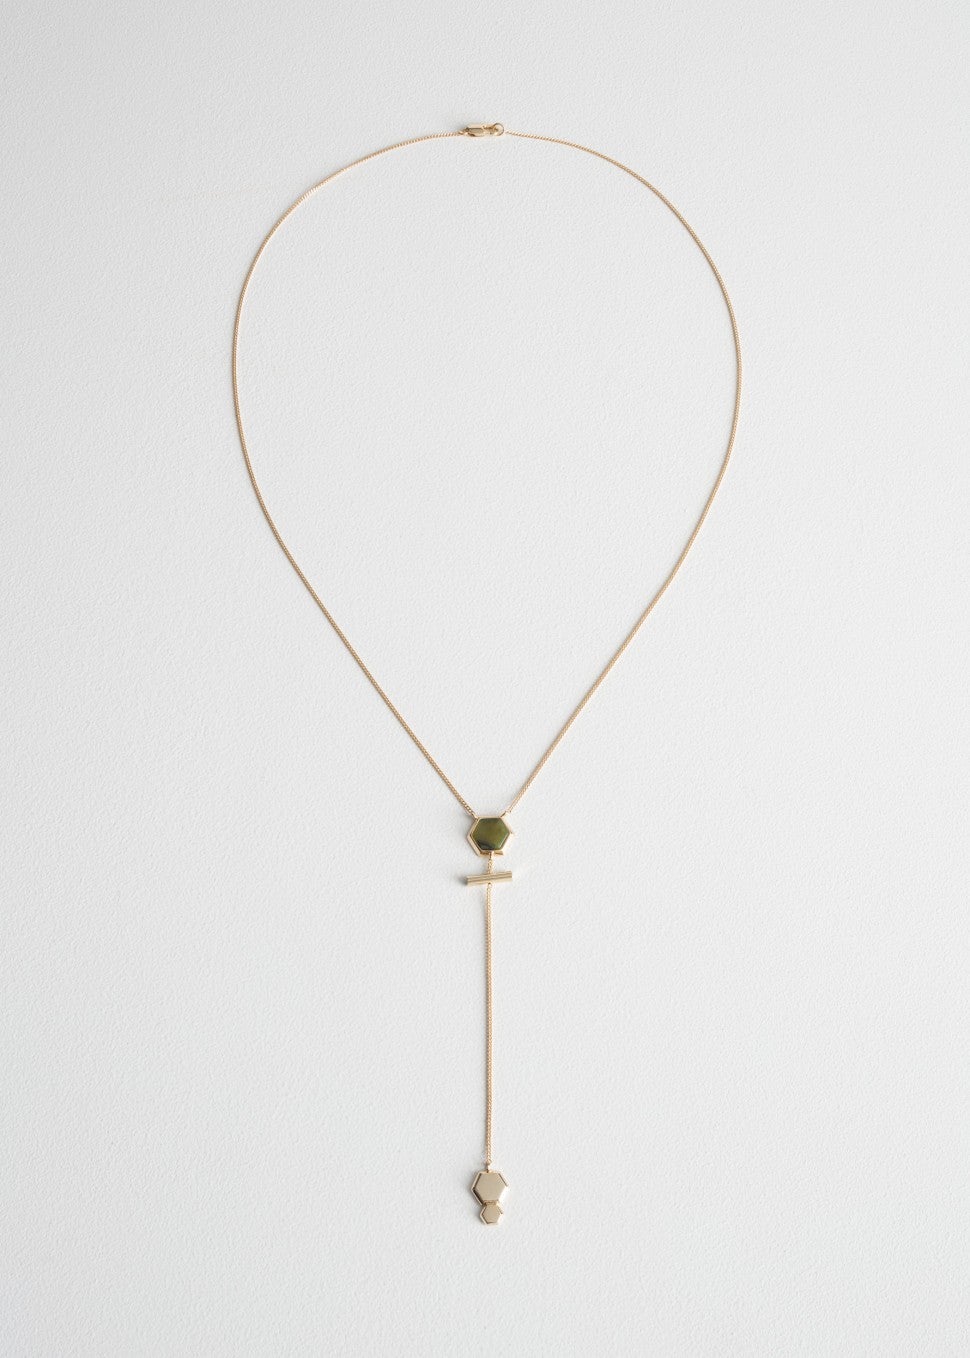 & Other Stories lariat necklace